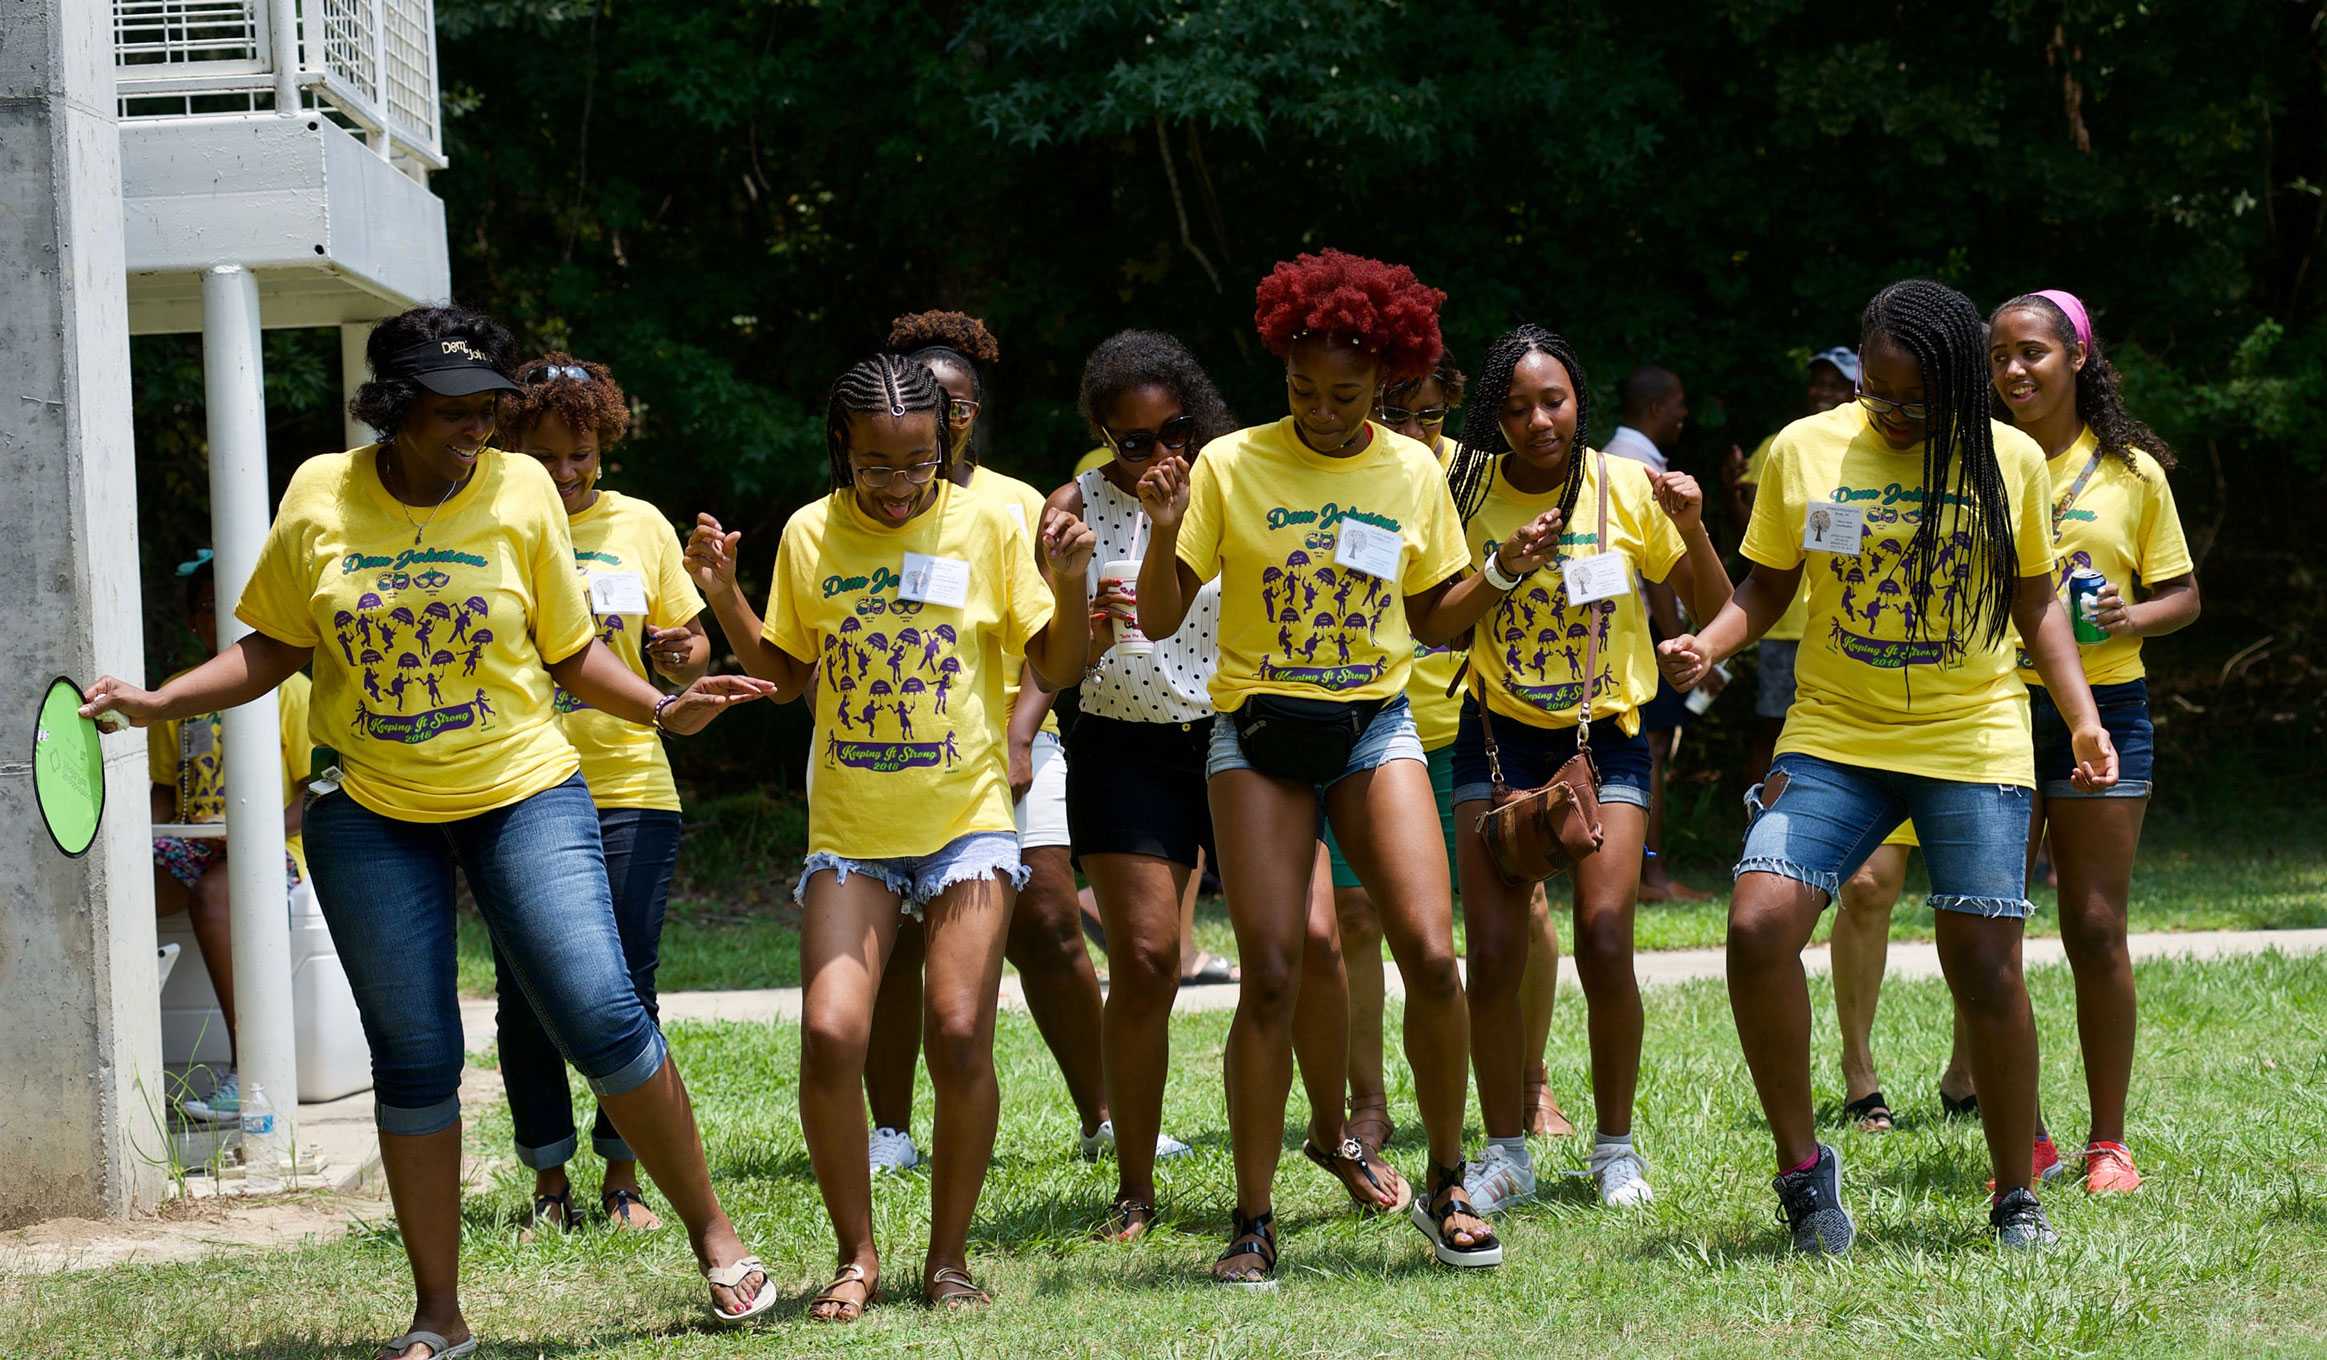 A photo of the Johnson family dancing together in a lawn. They all are wearing yellow shirt.